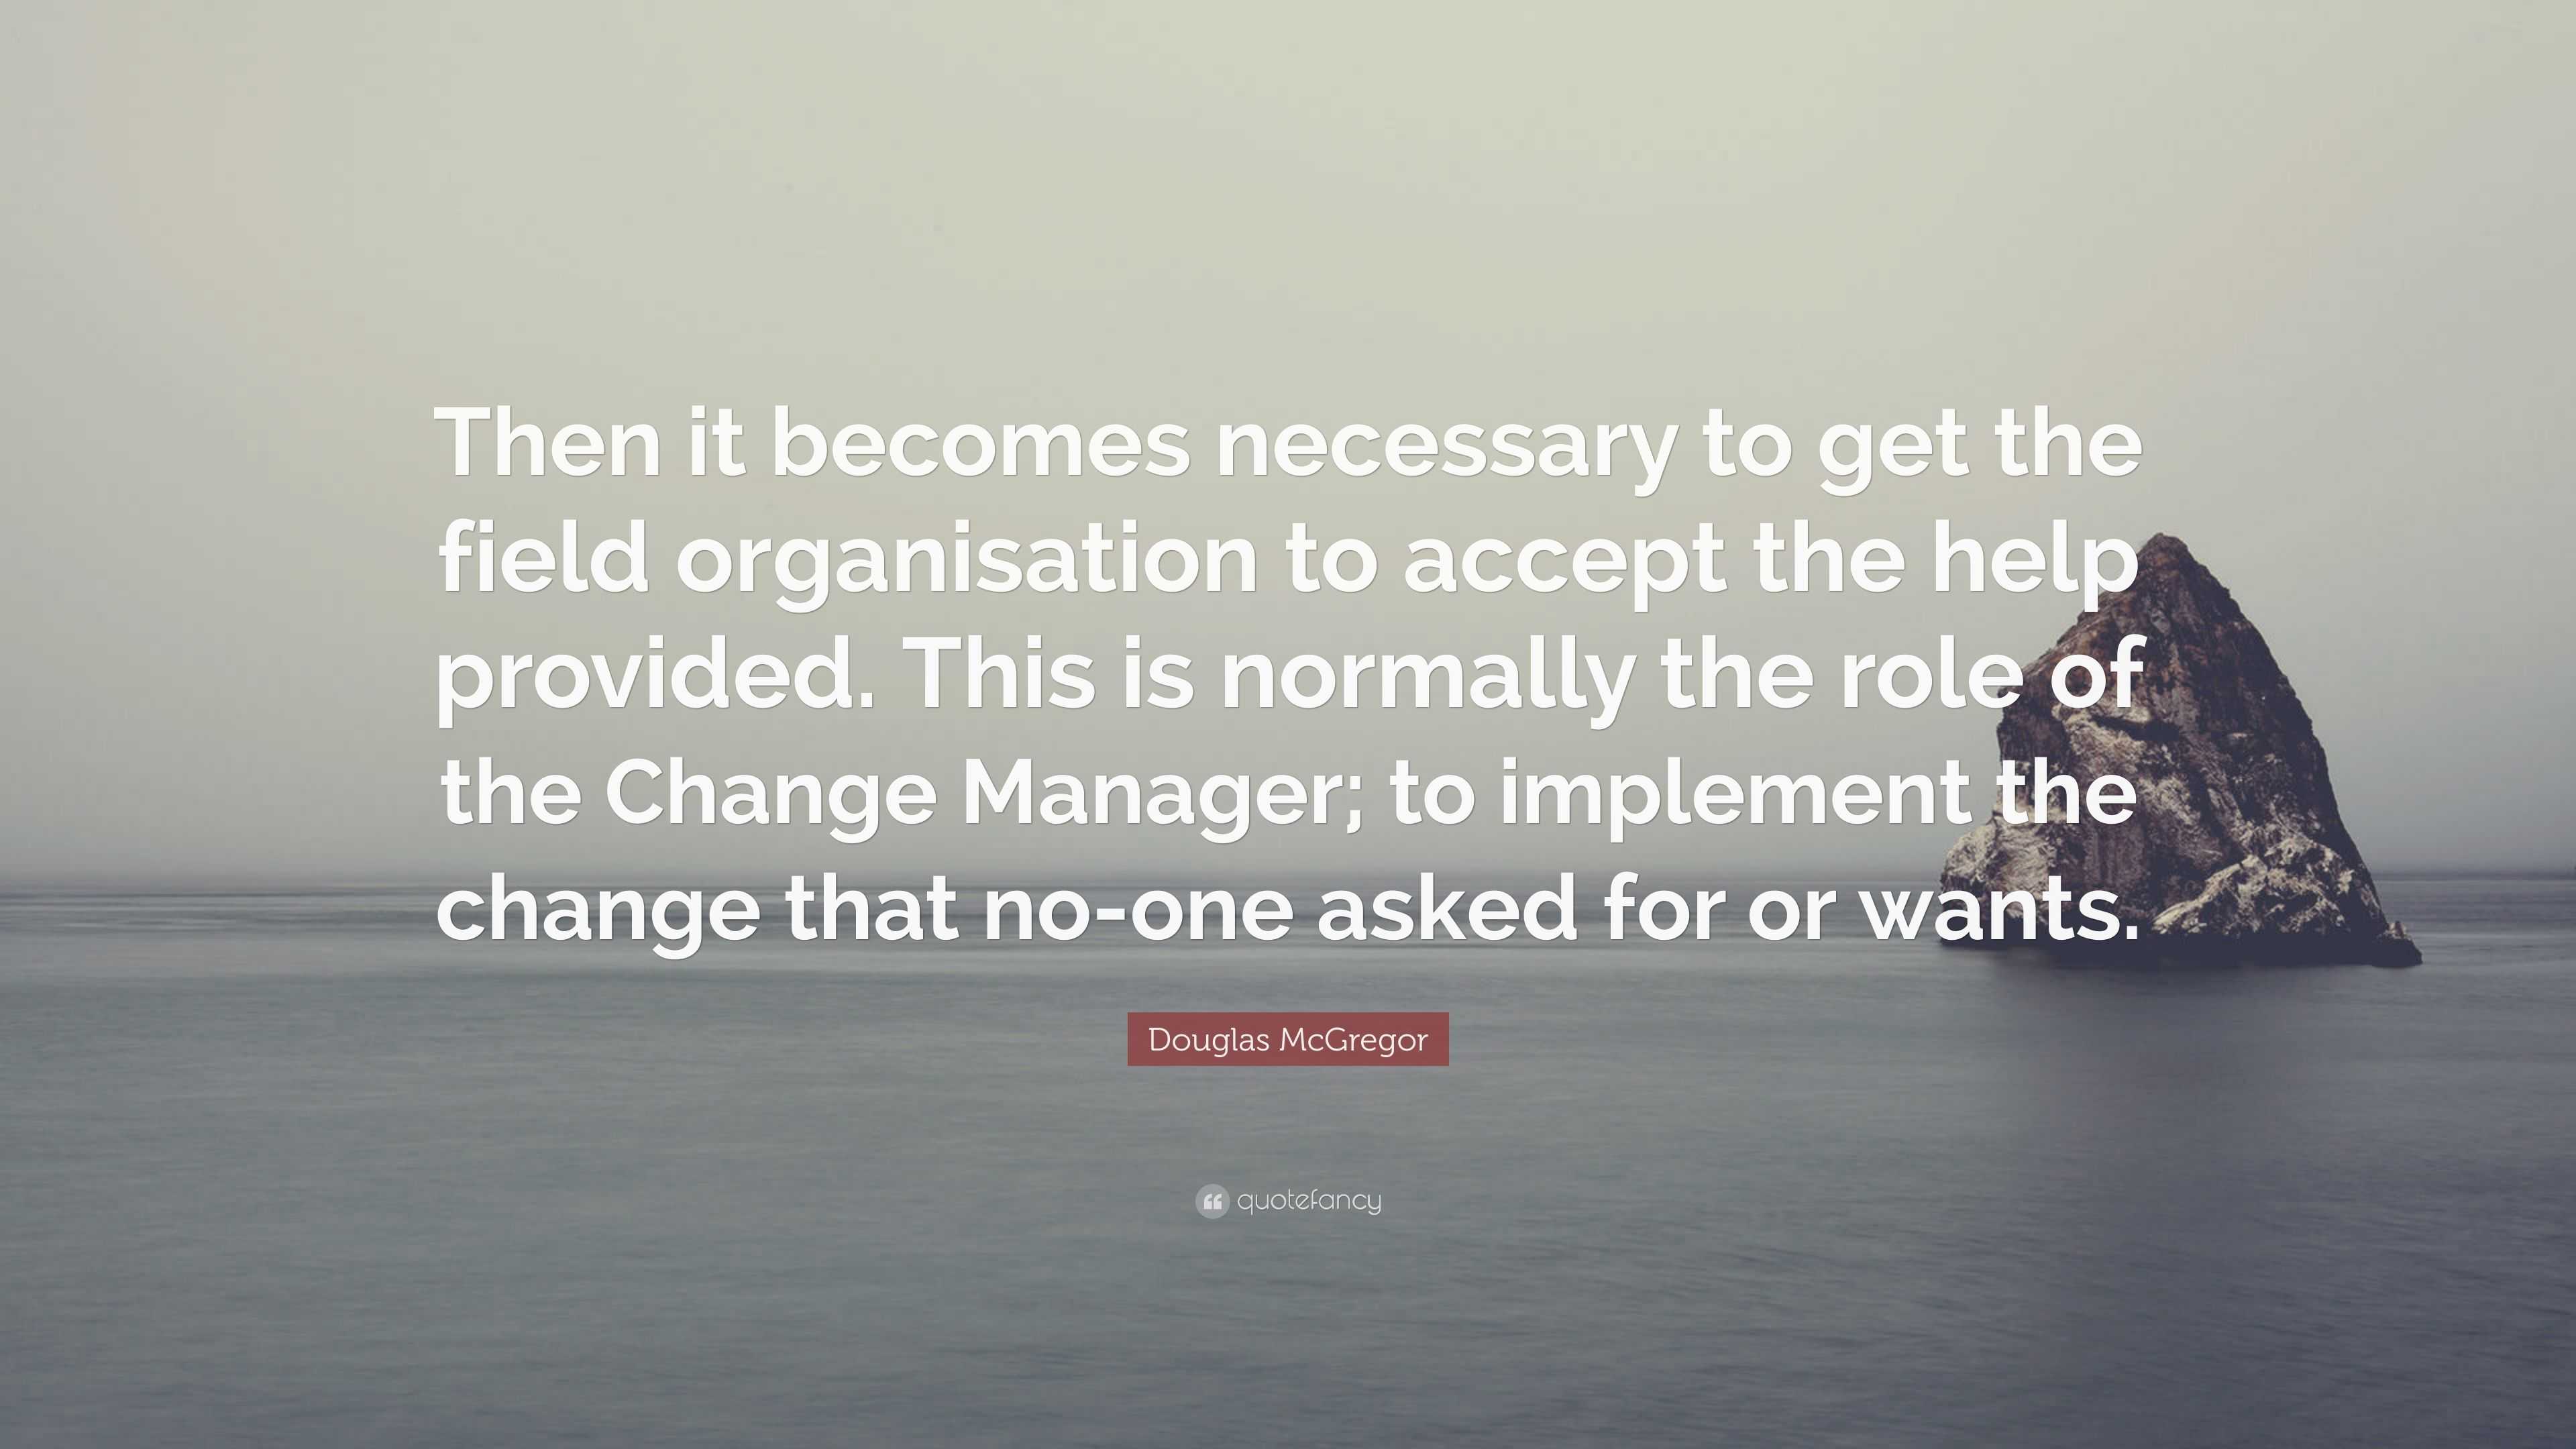 Douglas McGregor Quote: “Then it becomes necessary to get the field